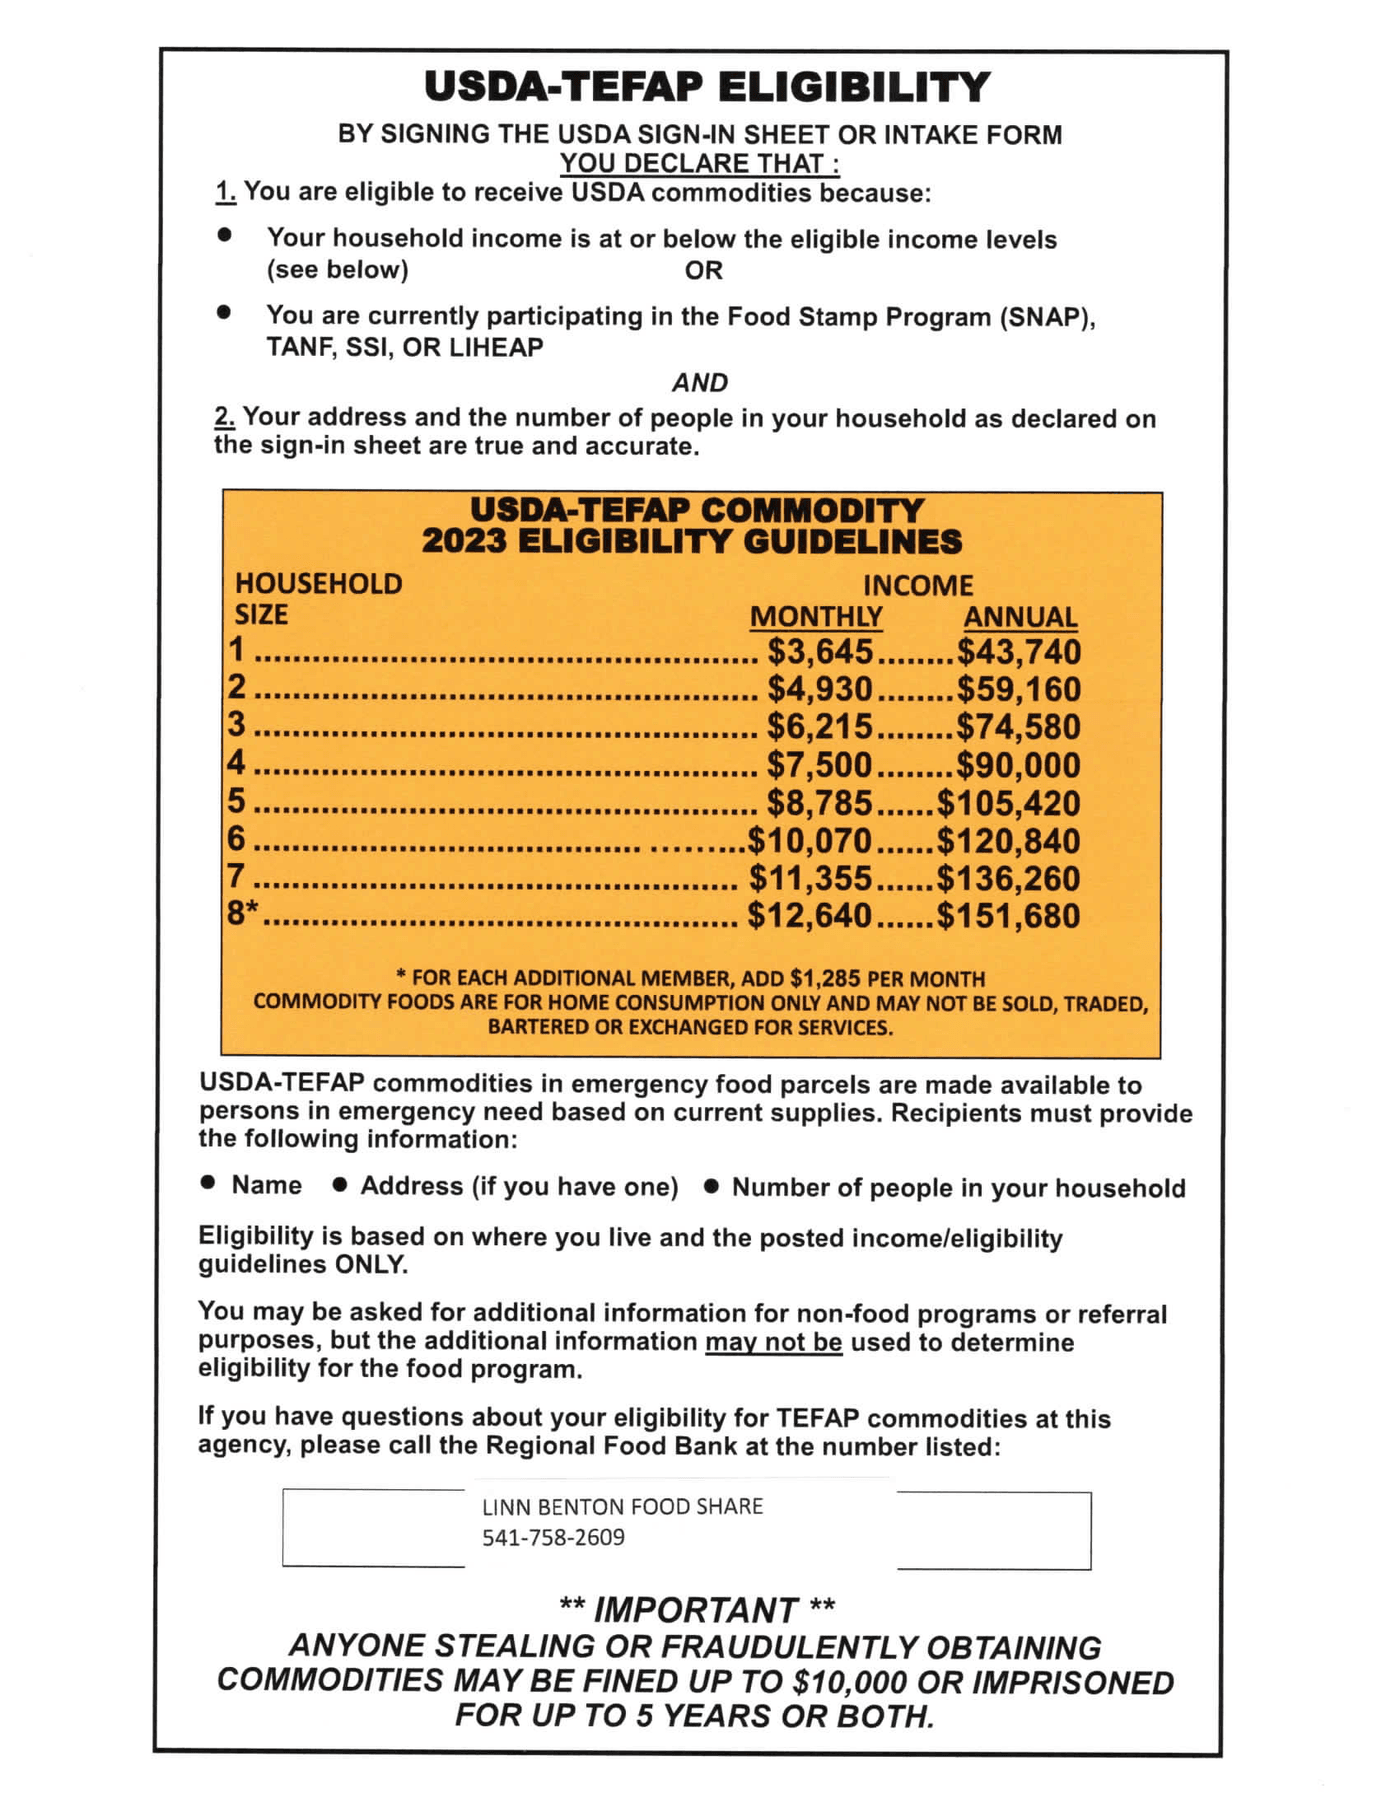 USDA-TEFAP COMMODITY 2023 ELIGIBILITY GUIDELINES monthly/annual income levels for household sizes: 1 = $3,645/$43,740; 2 = $4930/$59,160; 3=$6,215/$74,580; 4=$7,500/$90,000; 5=$8785/$105,420; 6=$10,070/$120,840; 7=$11,355/$136,260; 8*=$12,640/$151,680; *For each additional member, add $1,2845 per month. By signing the USDA Sign-in sheet or intake form, you declare that: 1) You are eligible to receive USDA commodities because: -Your household income is at or below the eligible income levels OR You are currently participating in the Food Stamp Program (SNAP), TANF, SSI, or LIHEAP AND 2) Your address and the number of people in your household as declared on the sign-in sheet are true and accurate. USDA-TEFAP commodities in emergency food parcels are made available to persons in emergency need based on current supplies. Recipients must provide the following information: Name, Address (if you have one), Number of people in your household. Eligibility is based on where you live and the posted income/eligibility guidelines ONLY. You may be asked for additional information for non-food programs or referral purposes, but the additional information may not be used to determine eligibility for the food program. If you have questions about your eligibility for TEFAP commodities at this agency, please call the Regional Food Bank at the number listed: Linn Benton Food Share 41-758-2609 ** IMPORTANT ** ANYONE STEALING OR FRAUDULENTLY OBTAINING COMMODITIES MAY BE FINED UP TO $10,000 OR IMPRISONED FOR UP TO 5 YEARS OR BOTH.